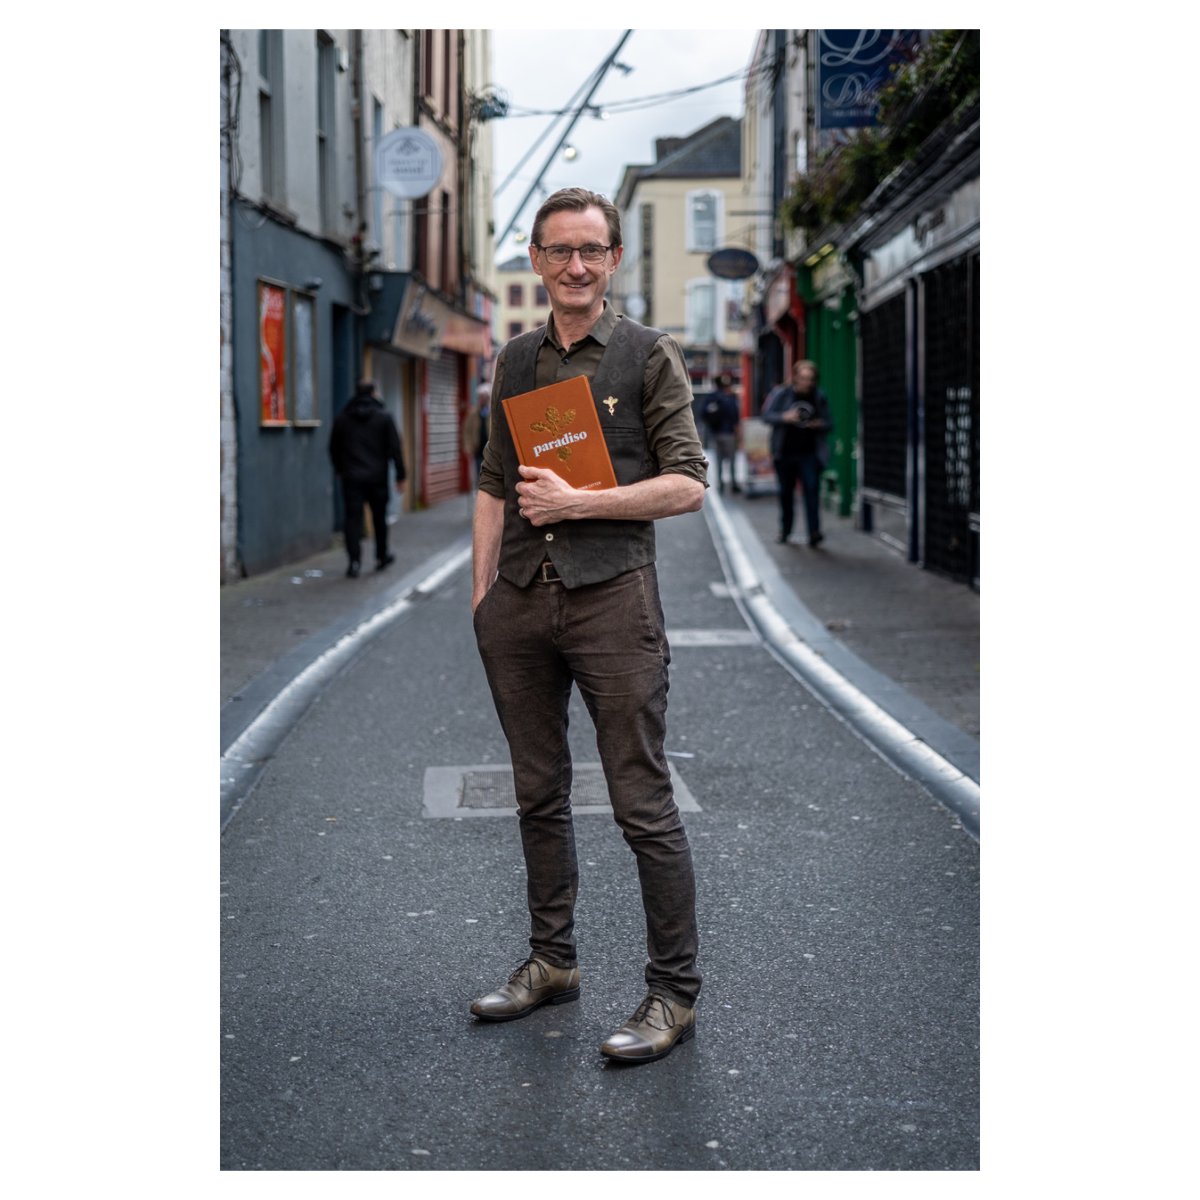 Congrats to @denis_cotter @paradisocork for winning Cookbook of the Year for PARADISO at the @irish_writing awards last night! To celebrate, the book is on sale for €35 this weekend only on our website. ninebeanrowsbooks.com